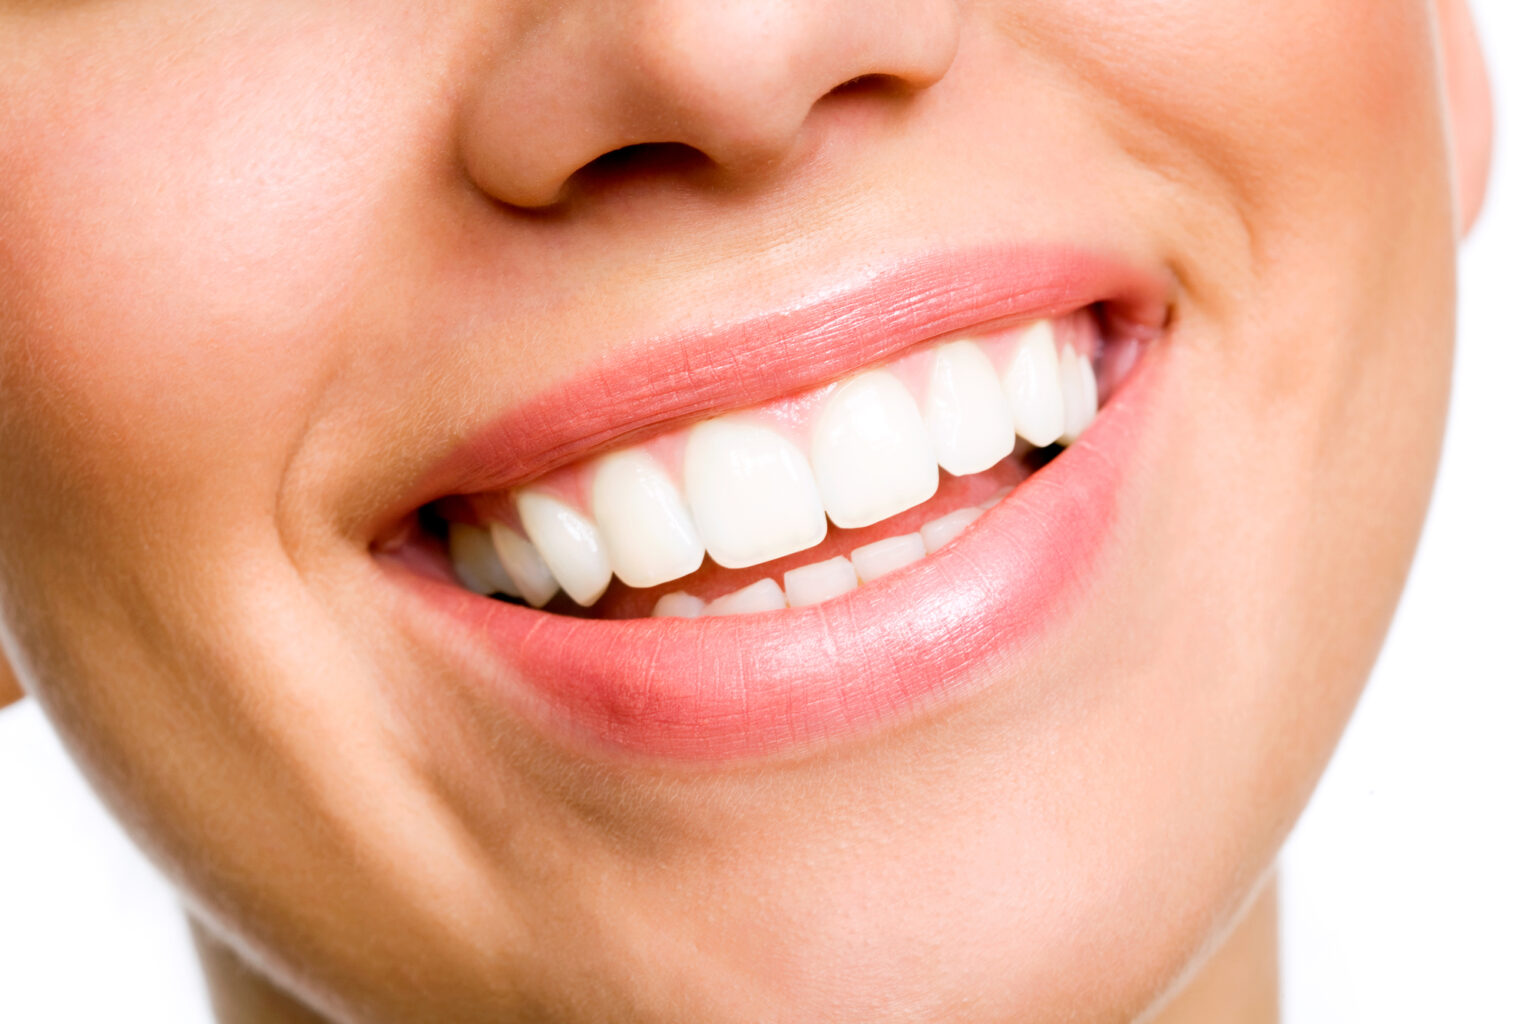 Close-up of a person's smile, showing healthy teeth thanks to affordable Dallas dentist care.